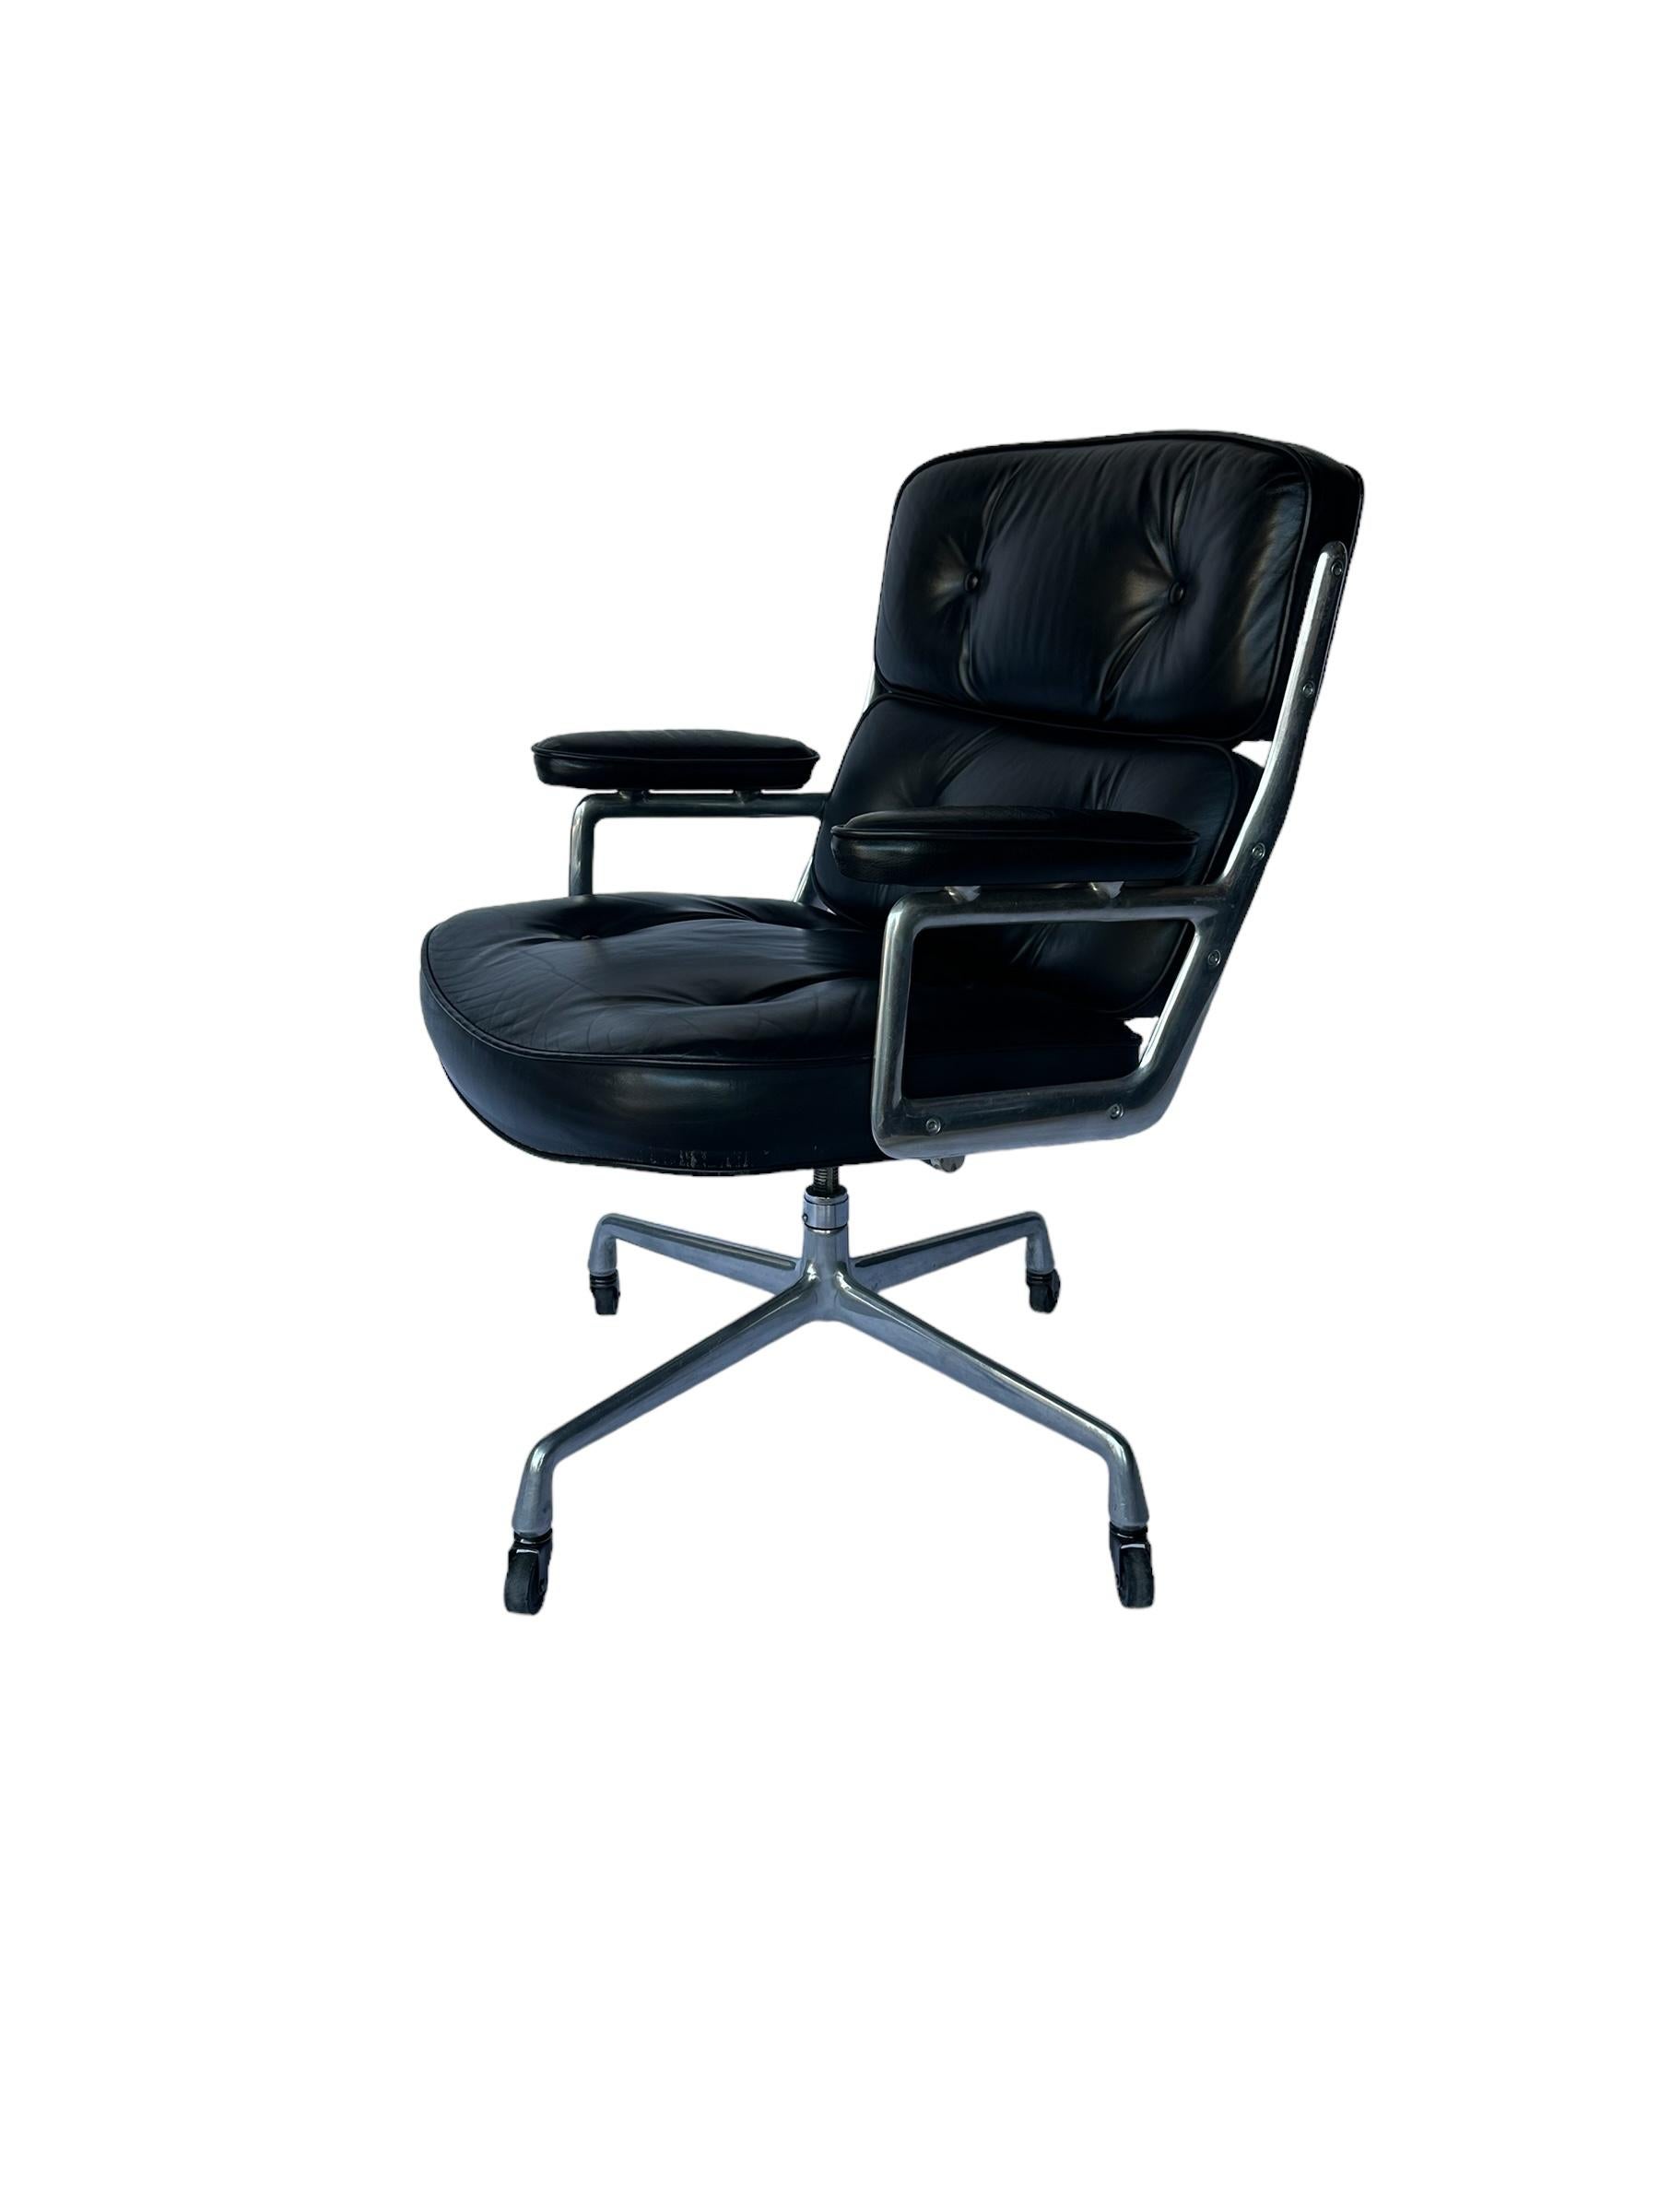 Late 20th Century Eames Time Life Office Desk Chair in Black Leather For Sale